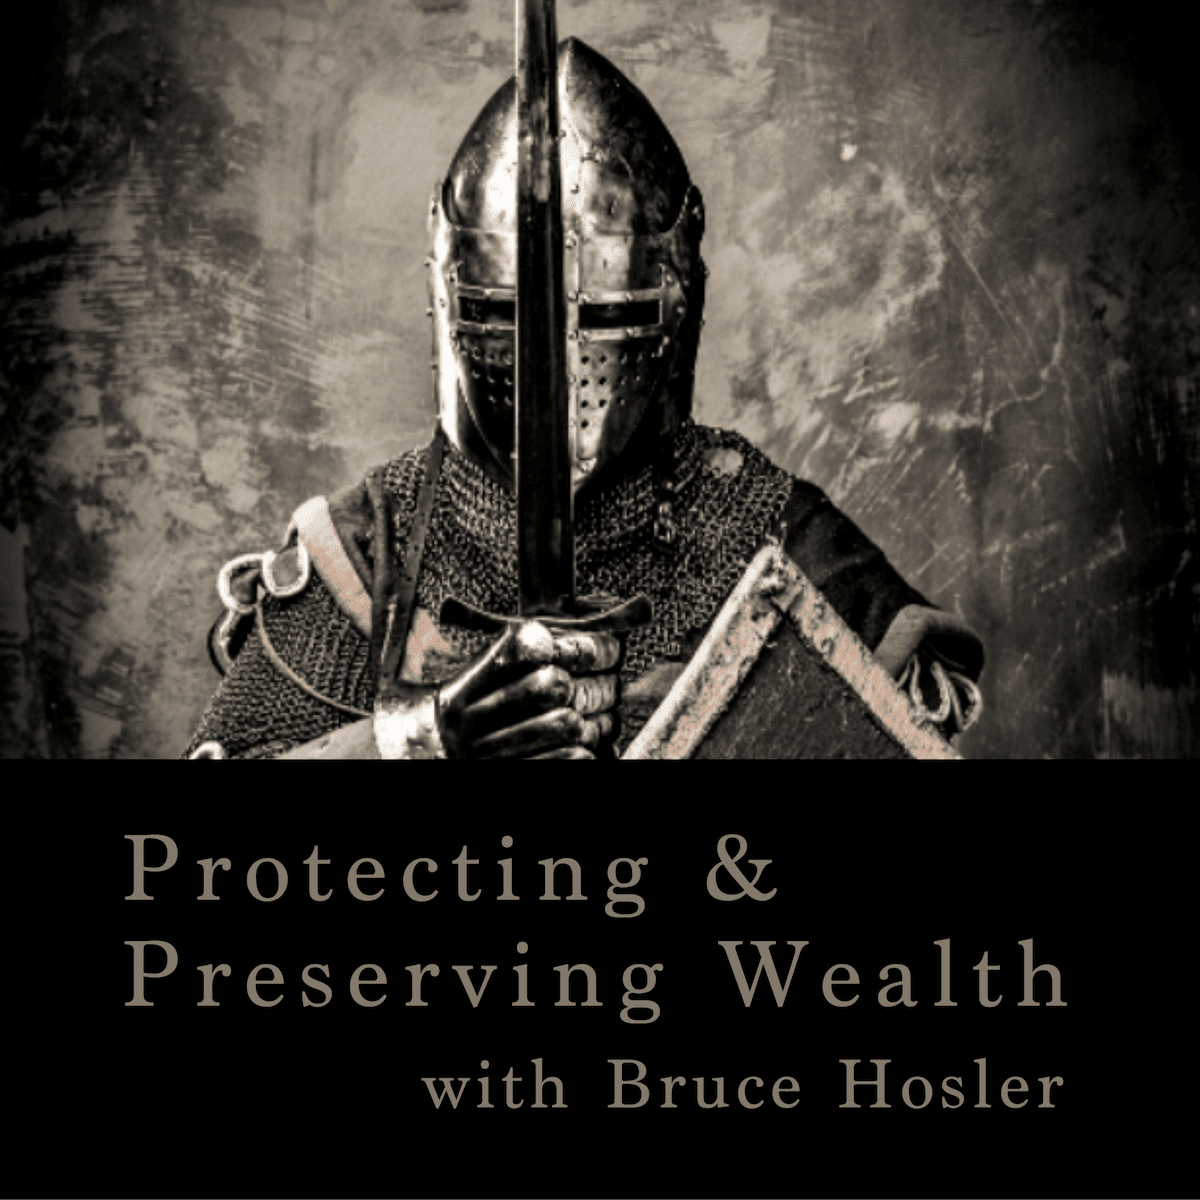 Protecting and preserving wealth with Bruce Hosler